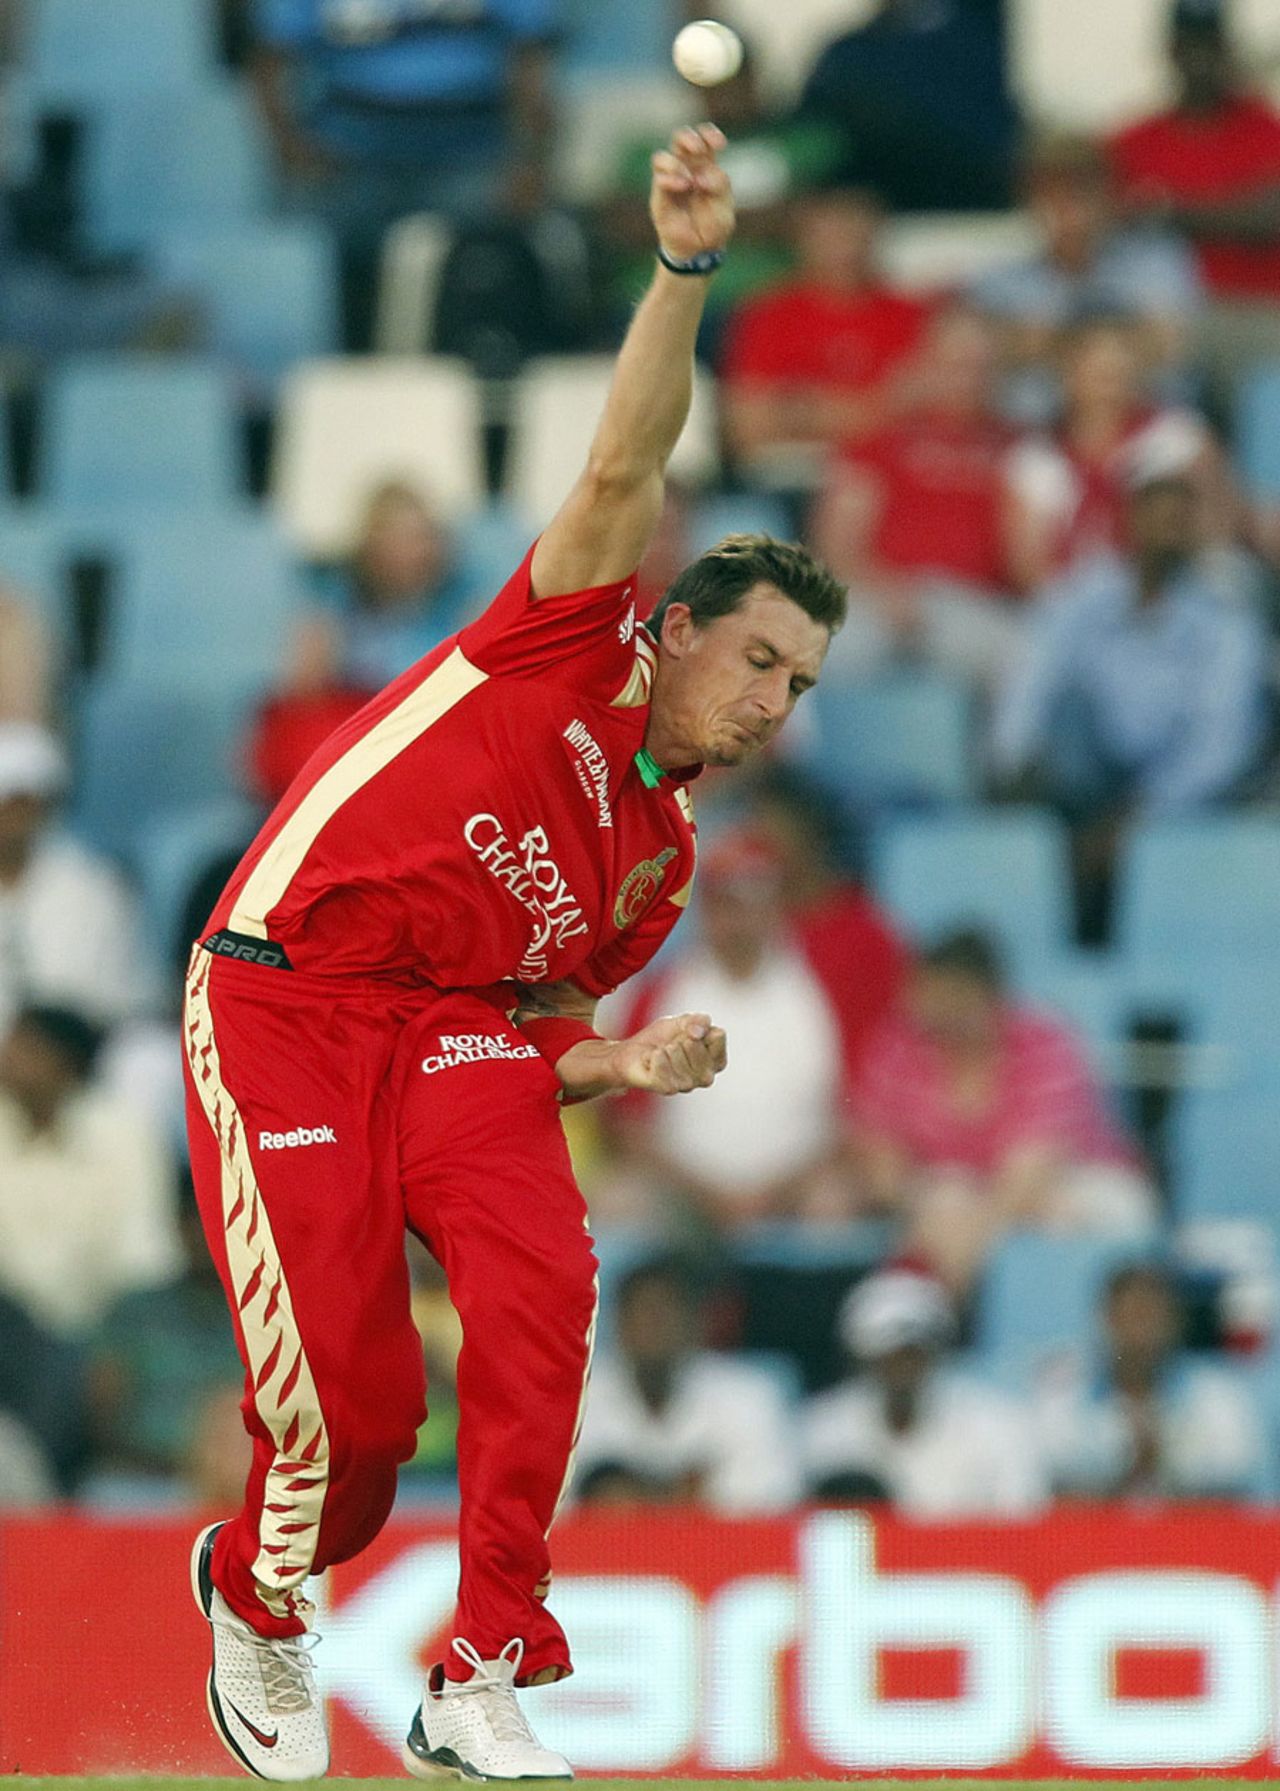 Dale Steyn sends one down at great pace, Royal Challengers Bangalore v Guyana, Champions League Twenty20, Centurion, September 12, 2010